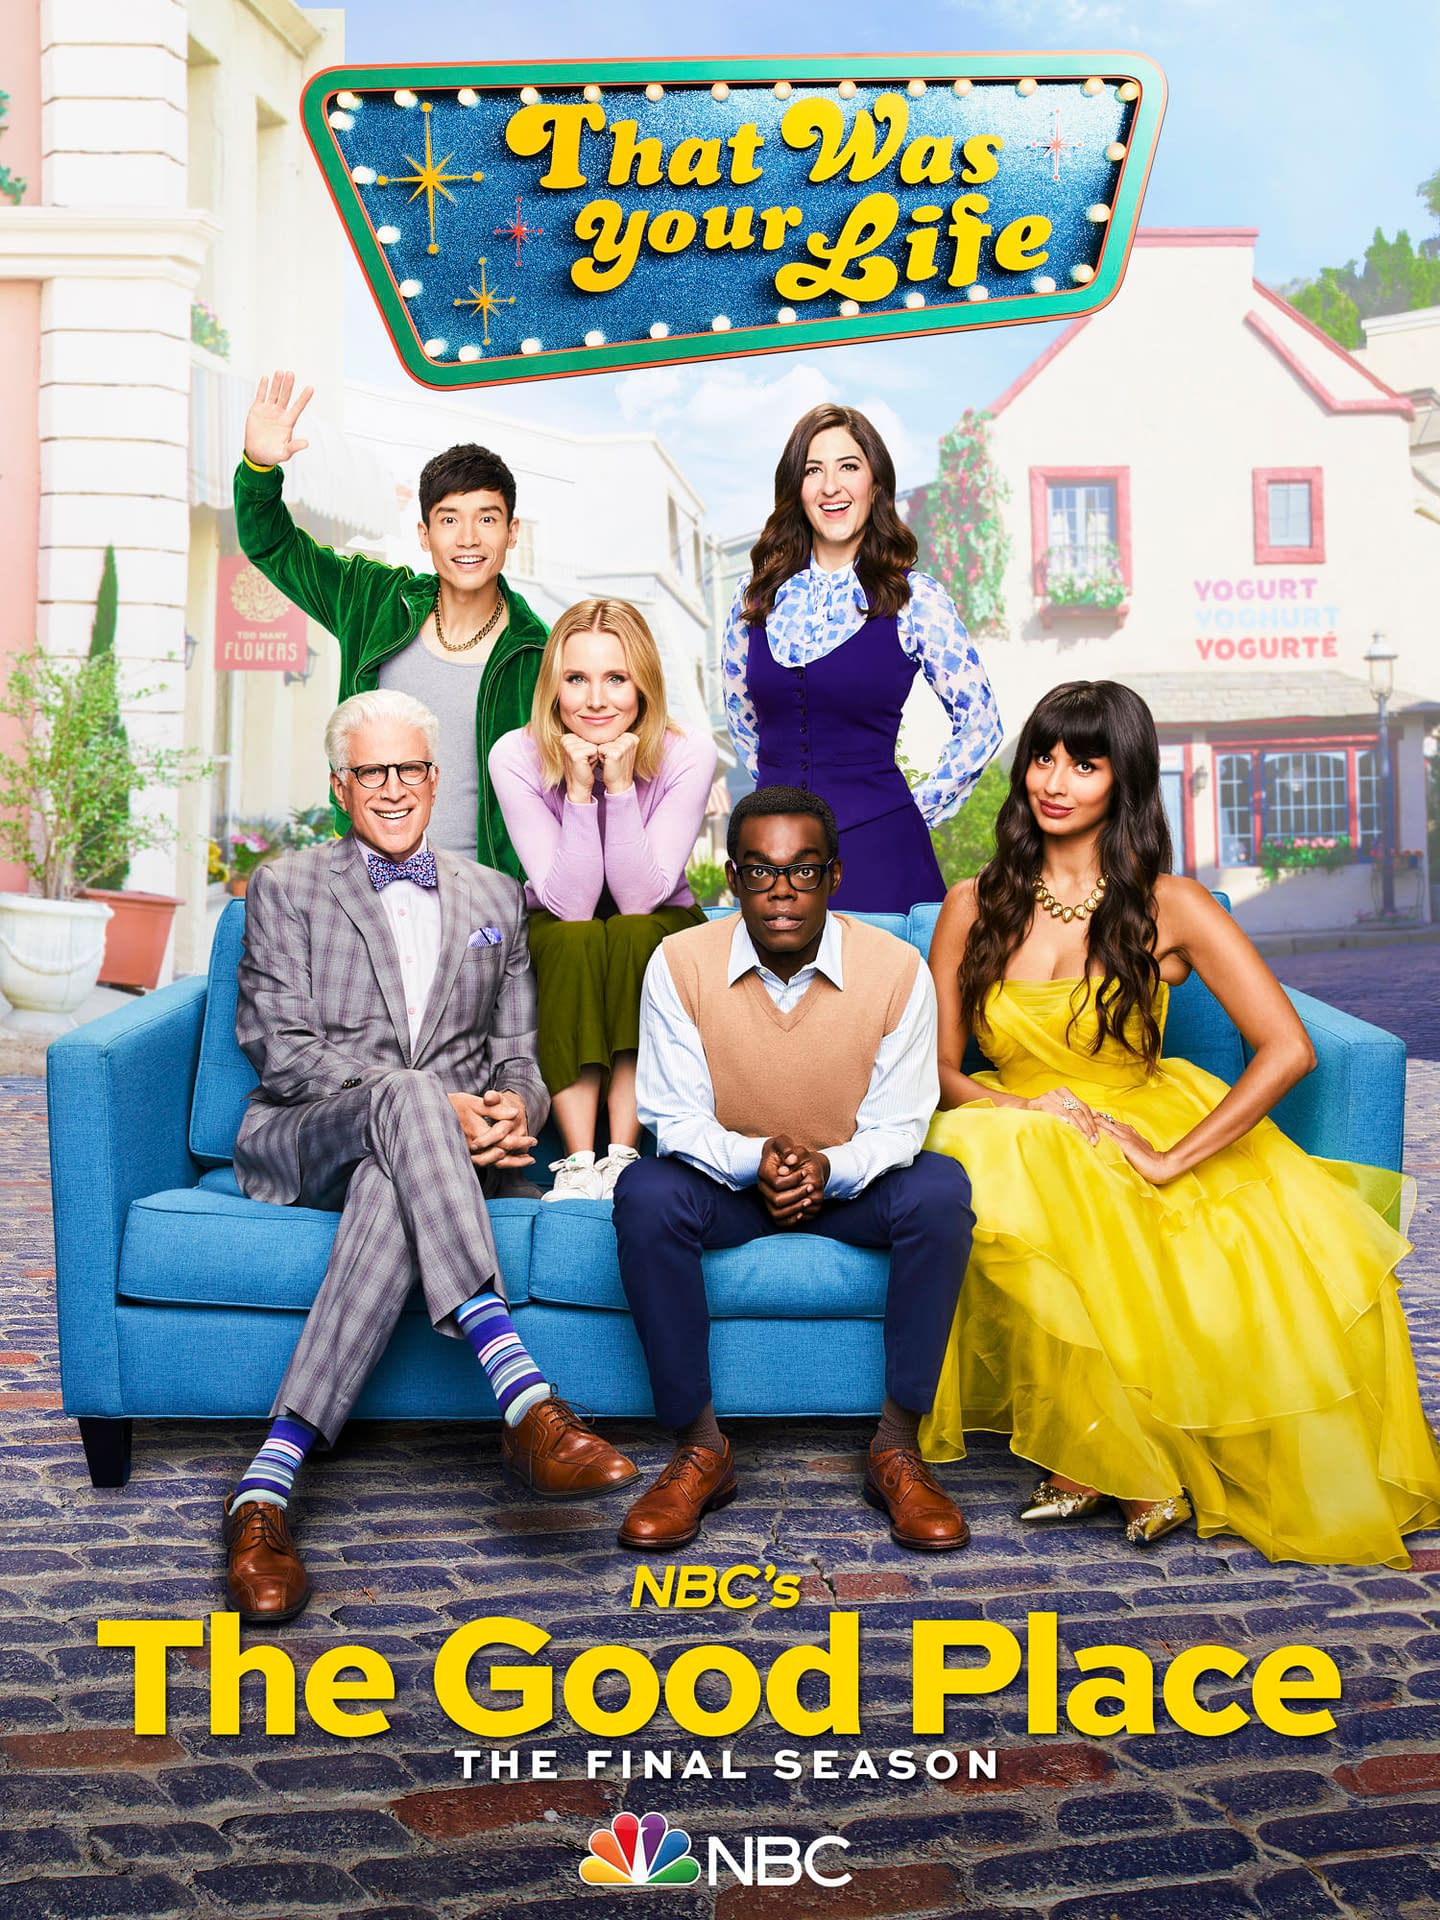 "The Good Place" Season 4 "A Girl From Arizona": The "Soul Squad" Is Back! [PREVIEW IMAGES]